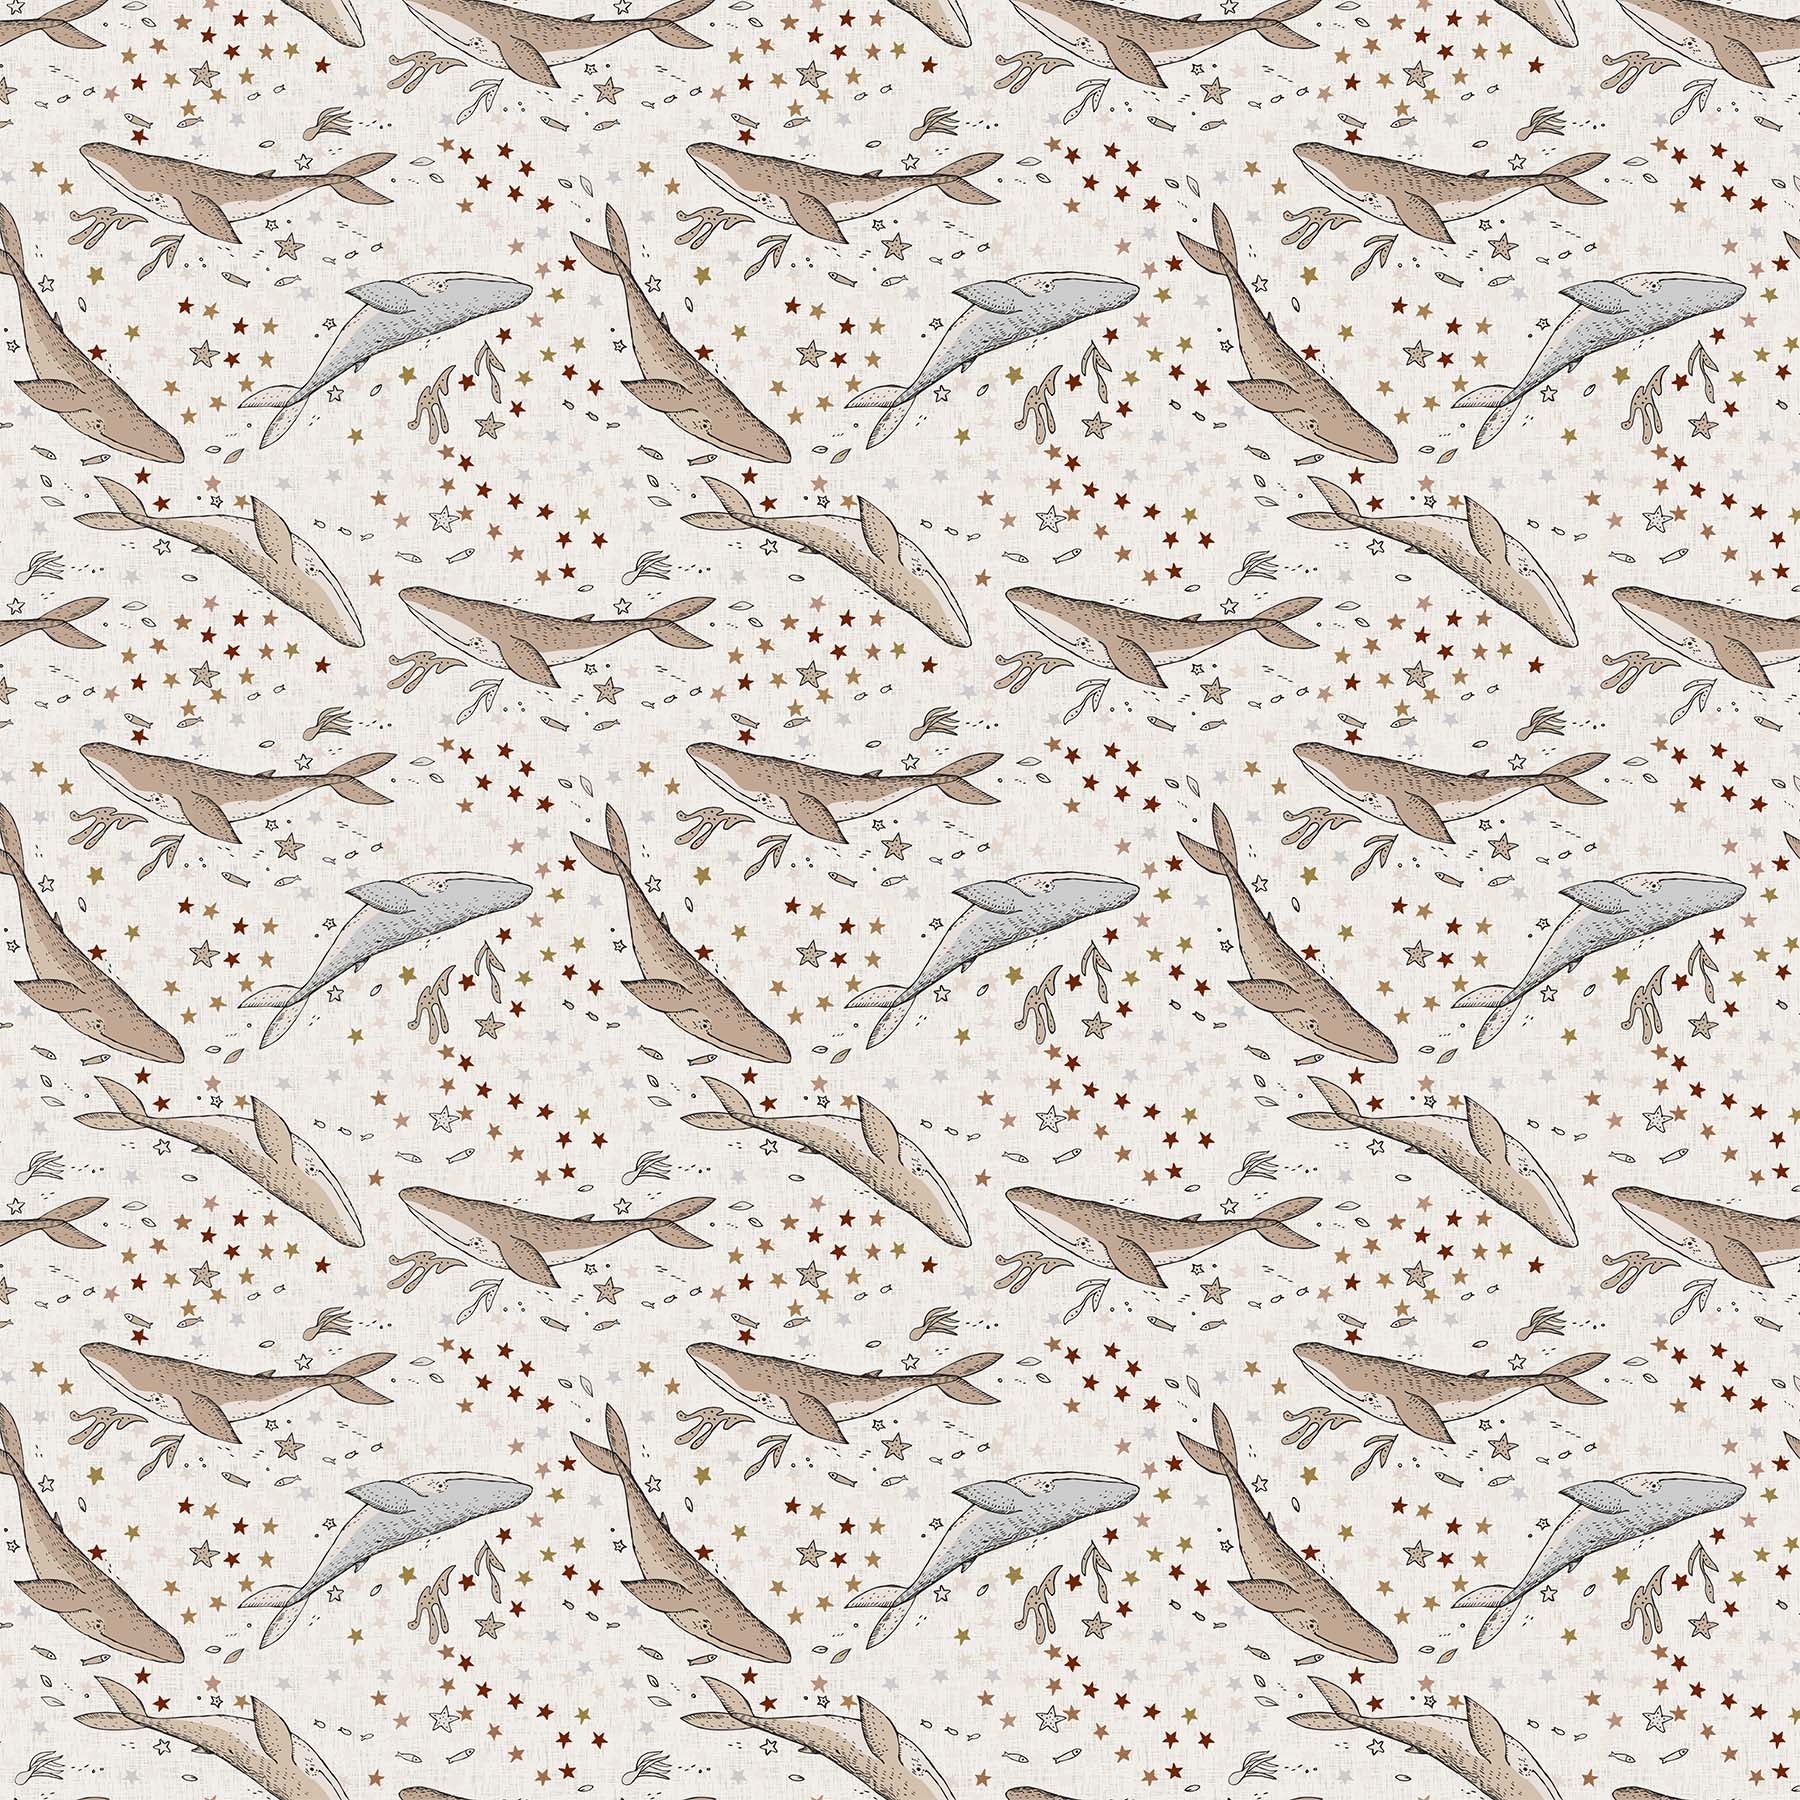 Fabric, Calm Waters, Cream Whales, 90619-12